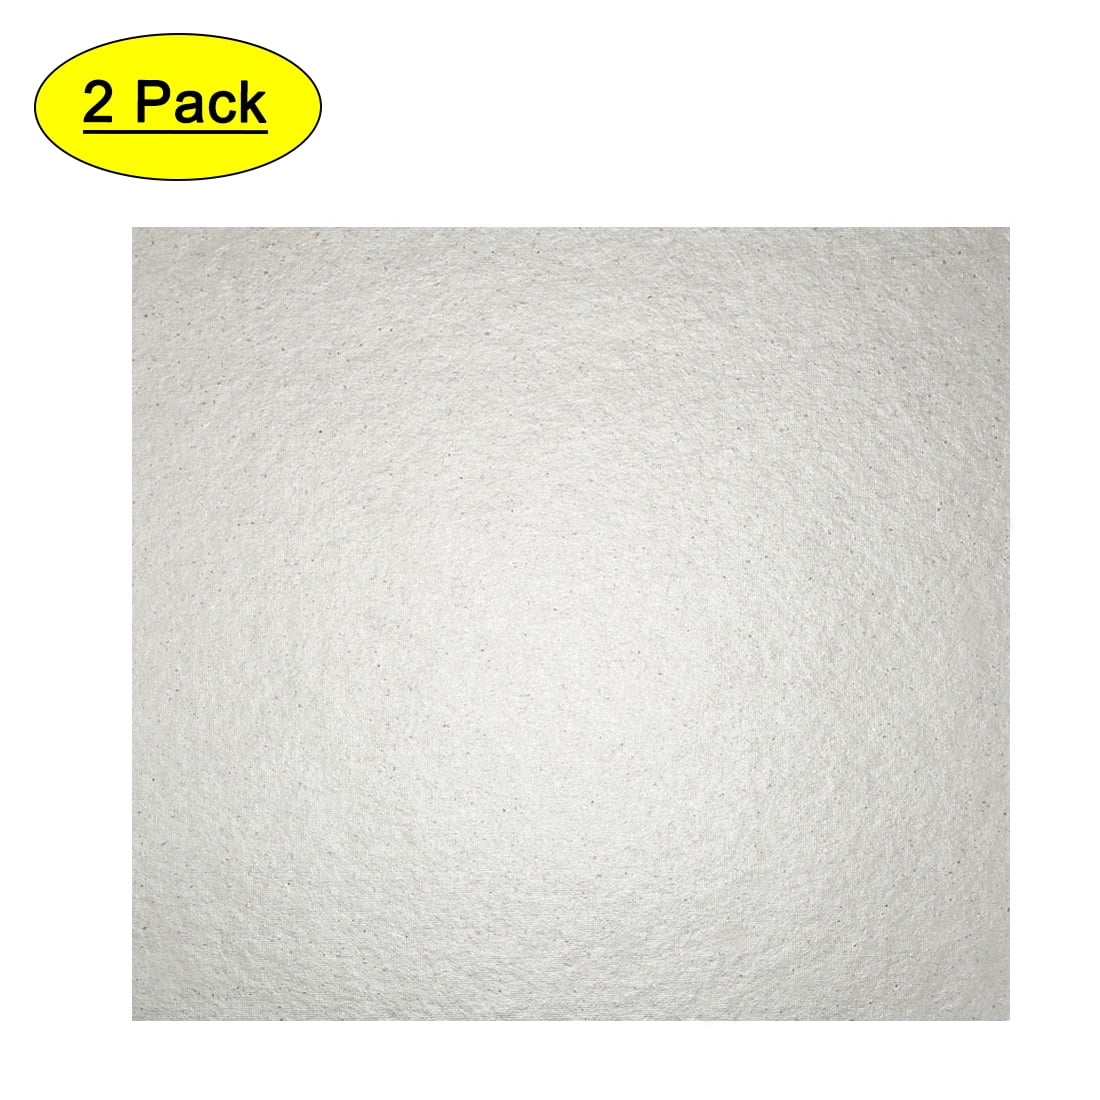 5Pcs Microwave Oven Mica Plate Mica Sheet Microwave Oven Repairing Part Faviu Mica Plates Sheets Silver Mica Sheet Replacement Mica Plate for Home for Kitchen